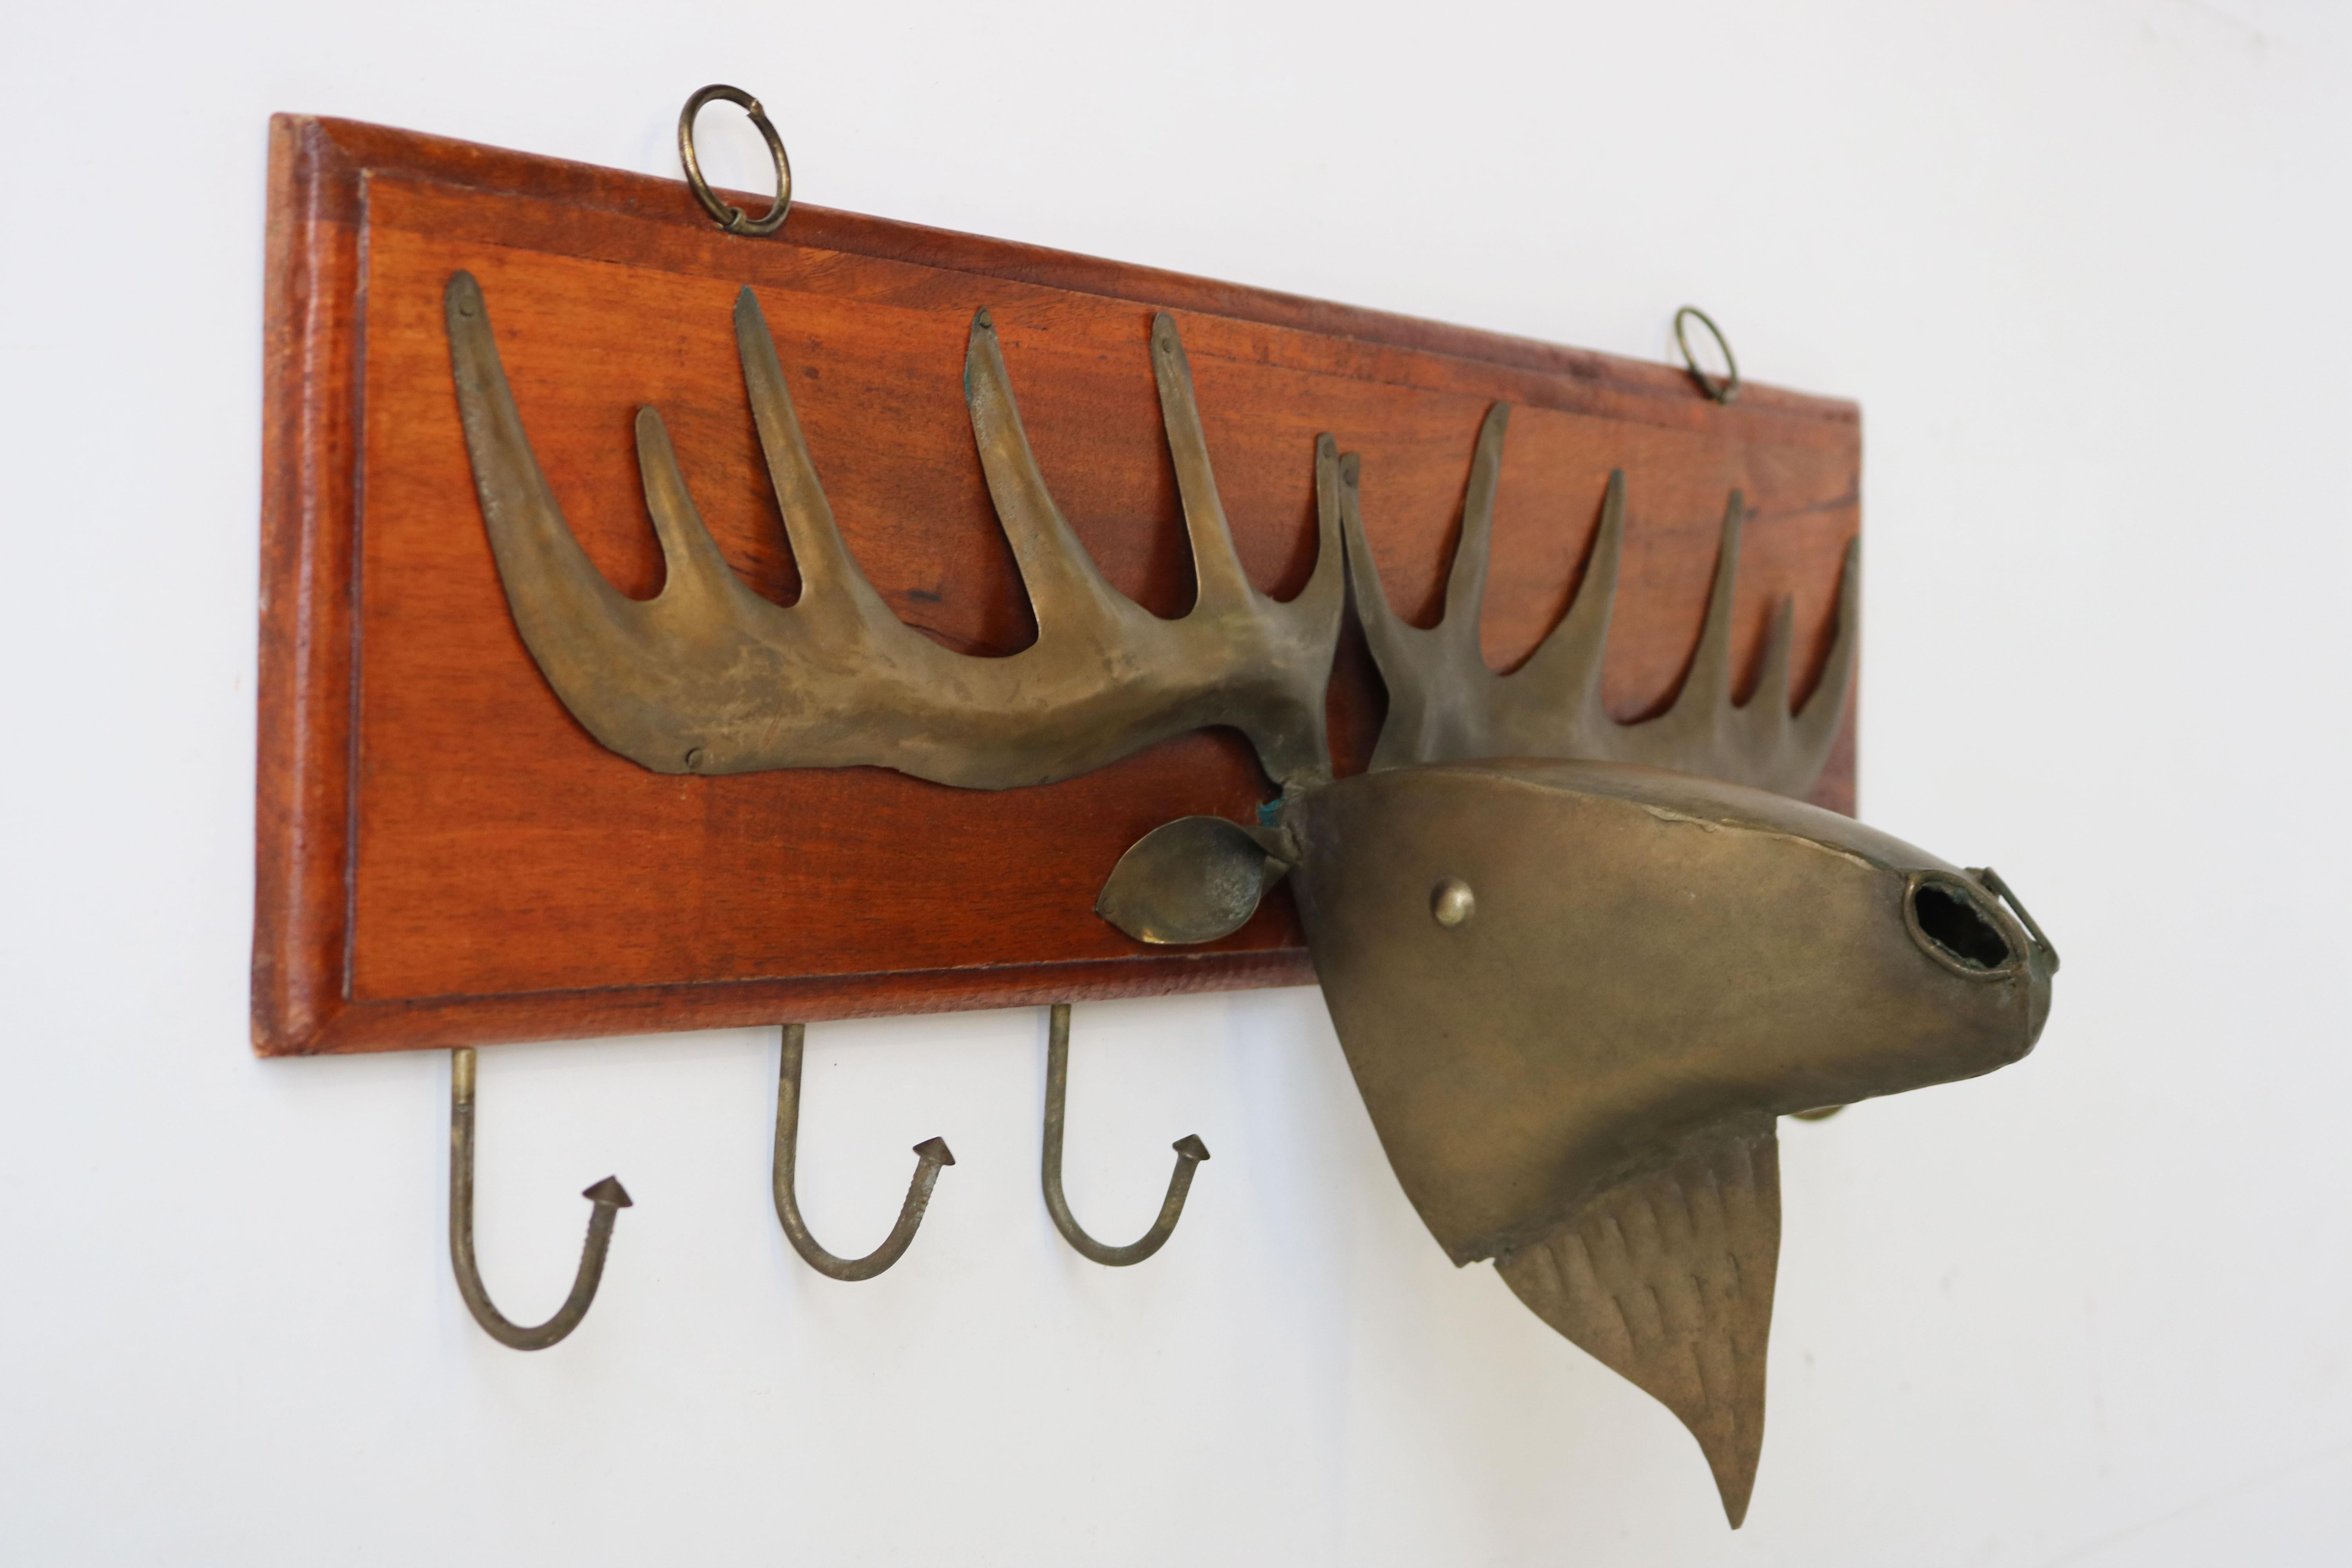 Marvelous mid-century danish design piece! This teak coat rack with large Moose sculpture in brass. 
Made with much attention to detail, the moose sculpture, hooks & rings are all hand forged. 
A lovely piece for your hallway or kitchen! The teak